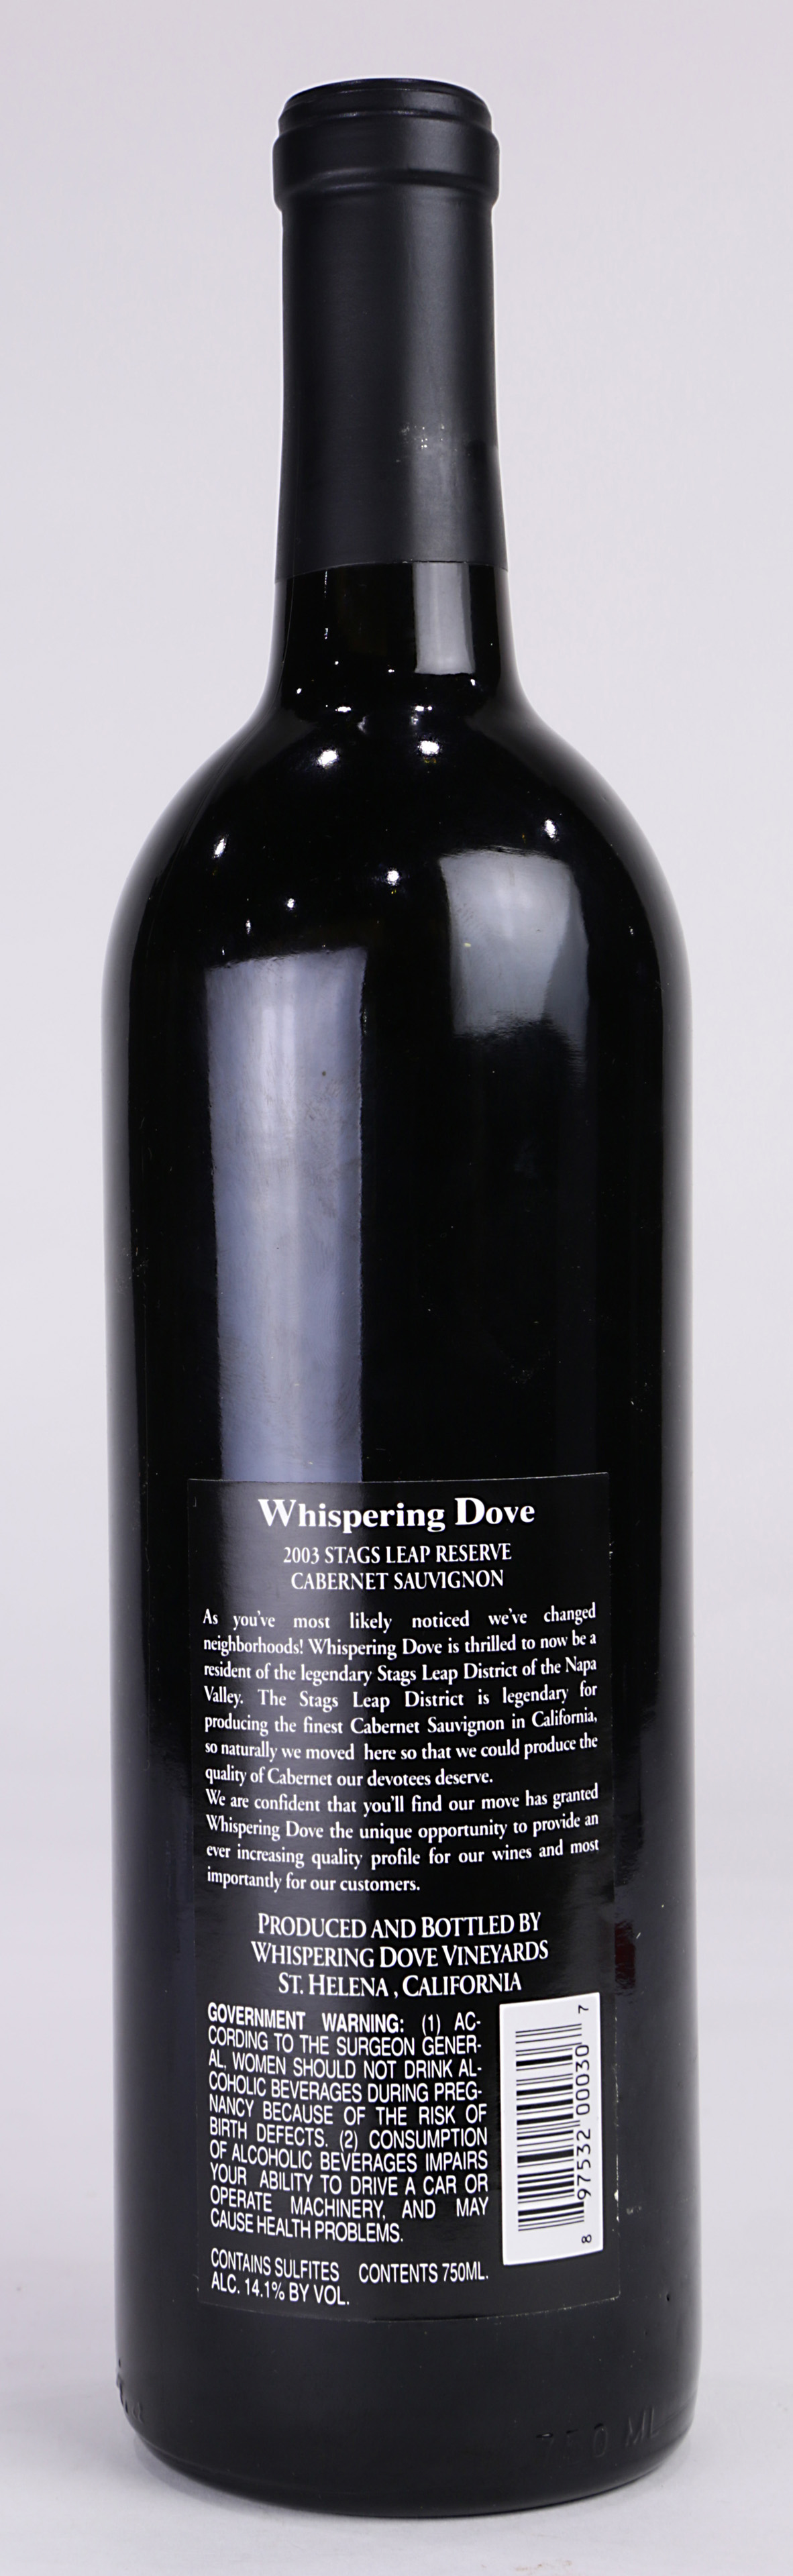 A case of 2003 Stags Leap Reserve Whispering Dove Cabernet Sauvignon - Image 2 of 6